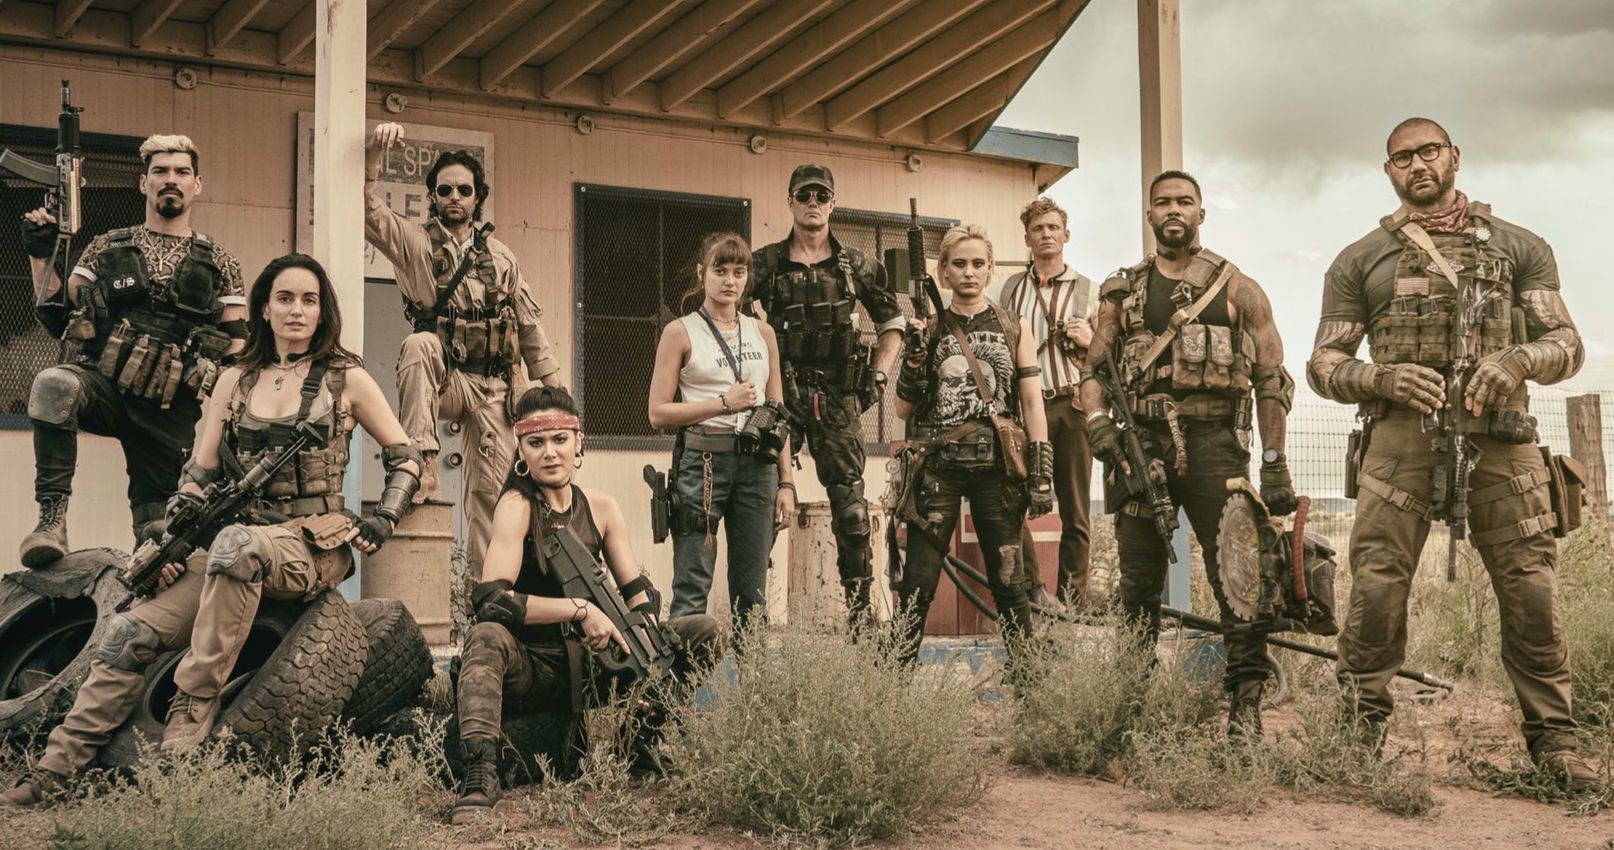 Netflix's Army of the Dead Cast Photo Shared by Dave Bautista